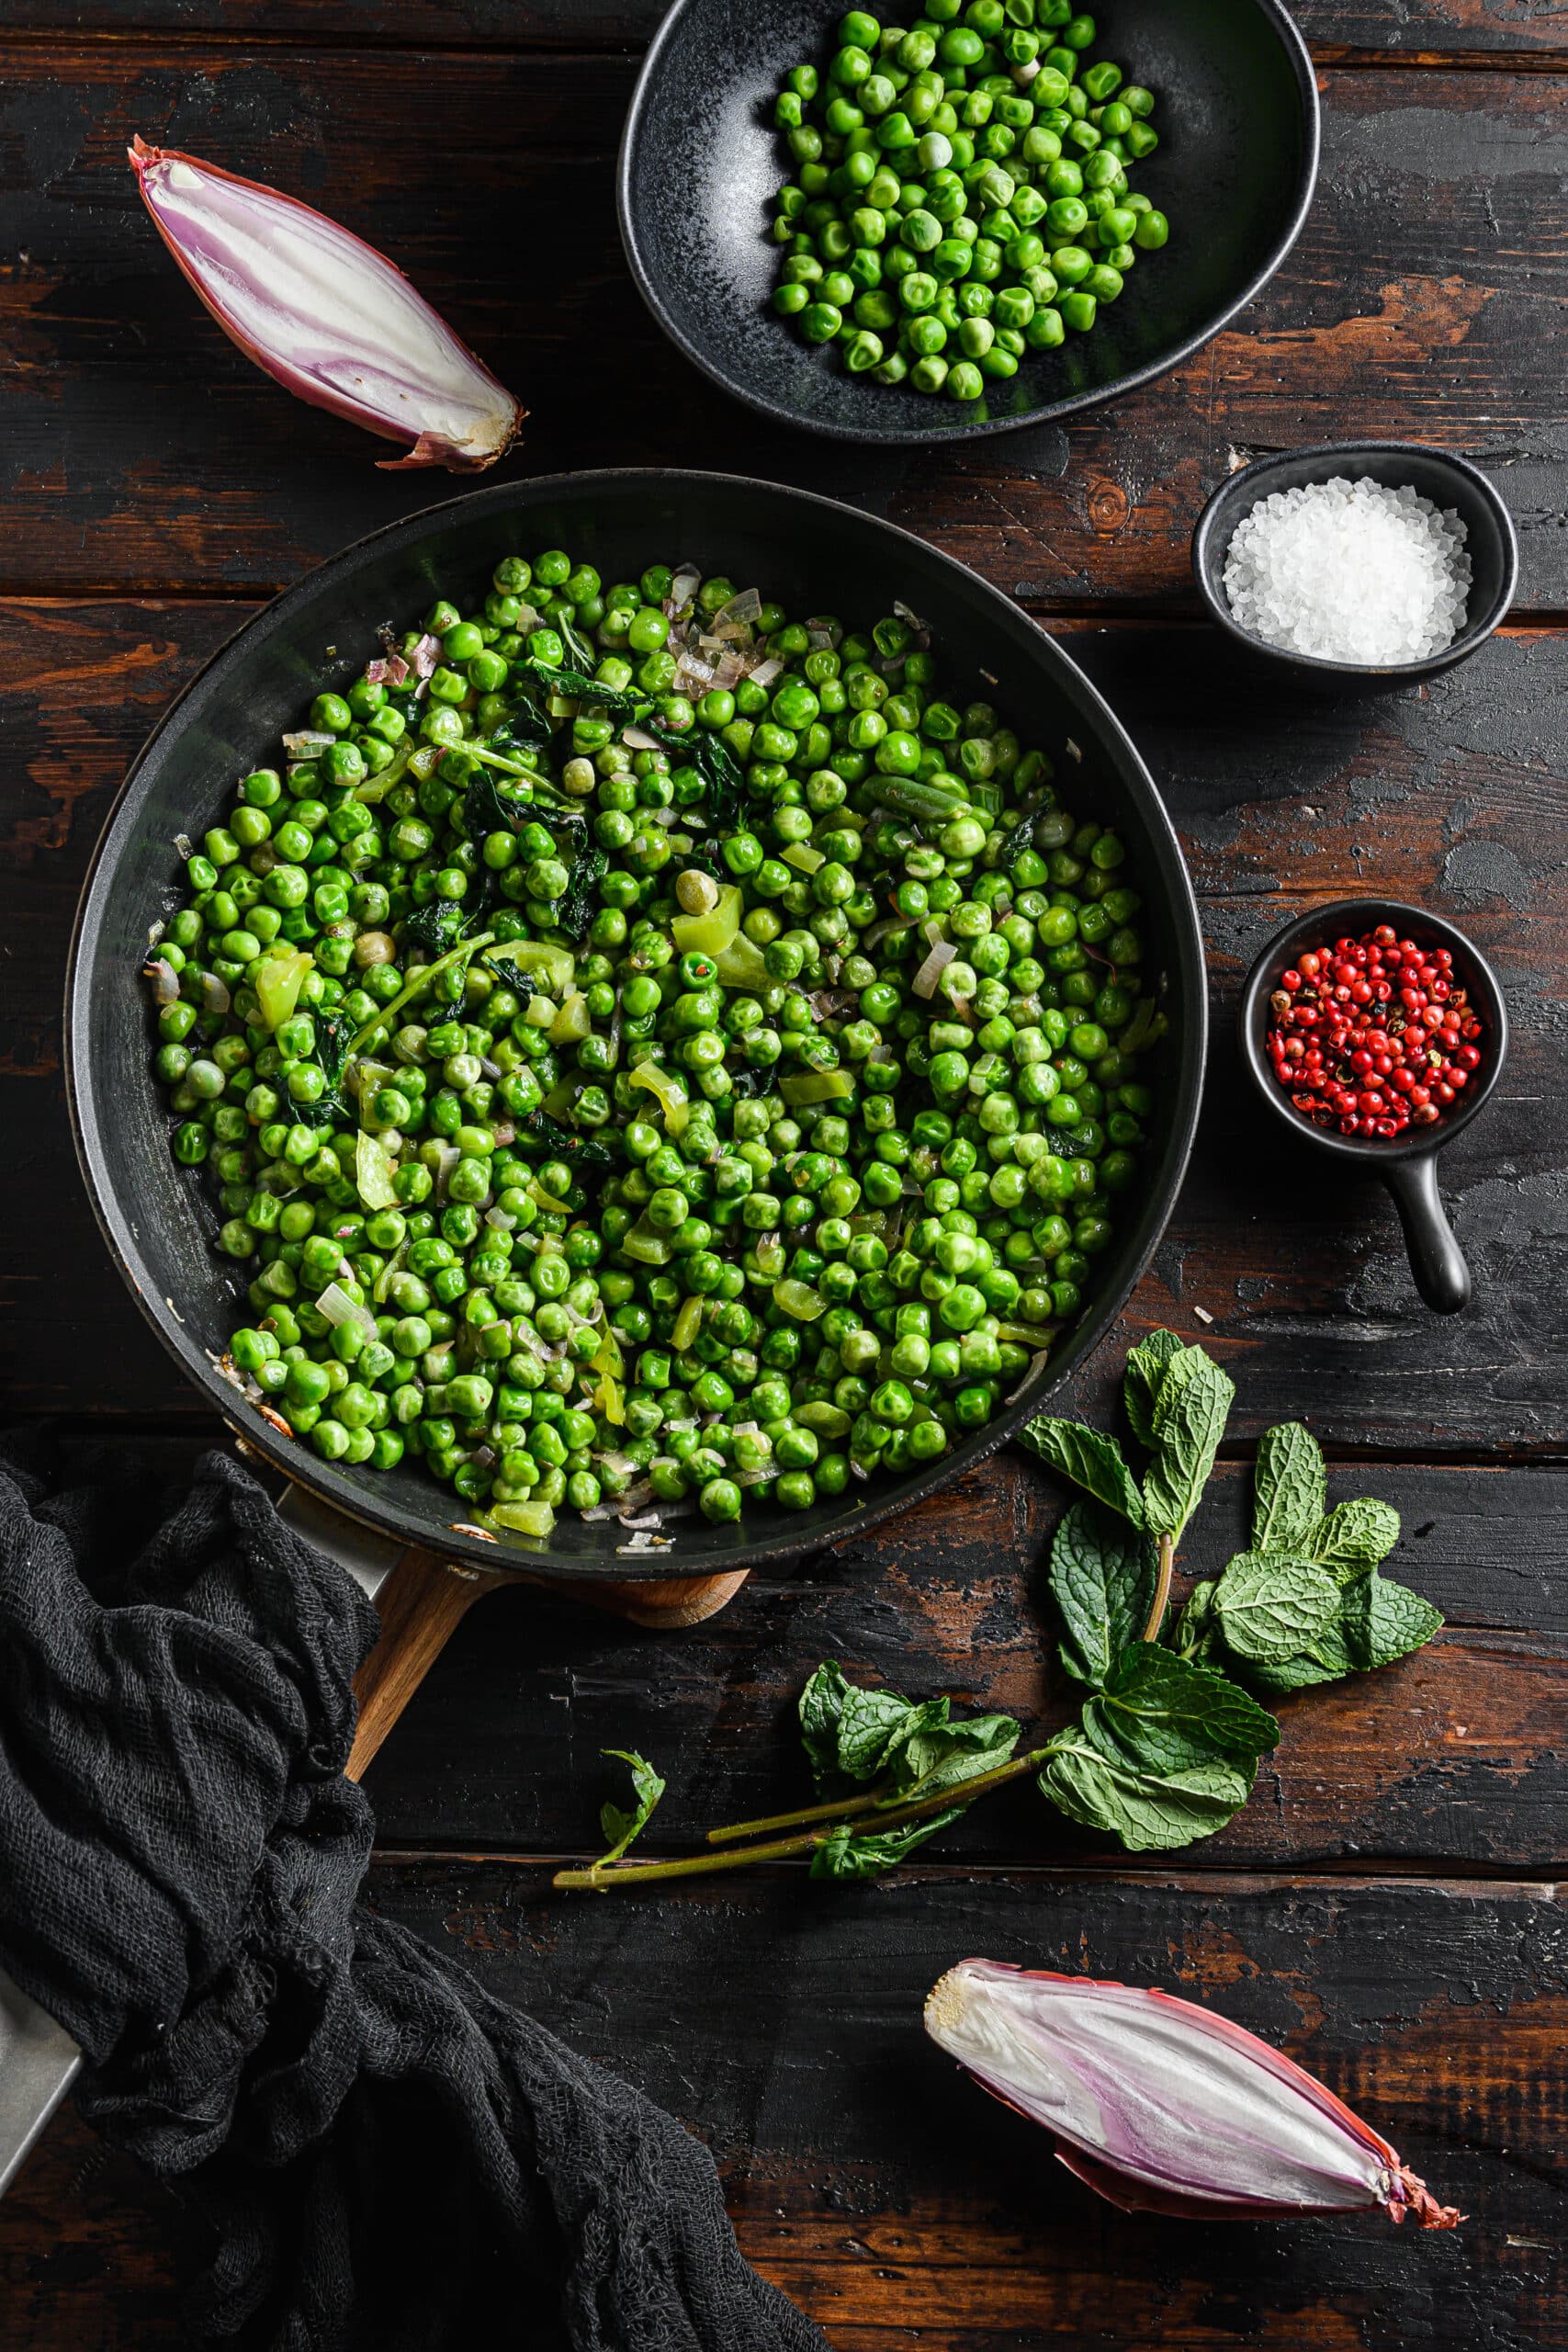 How To Cook English Peas